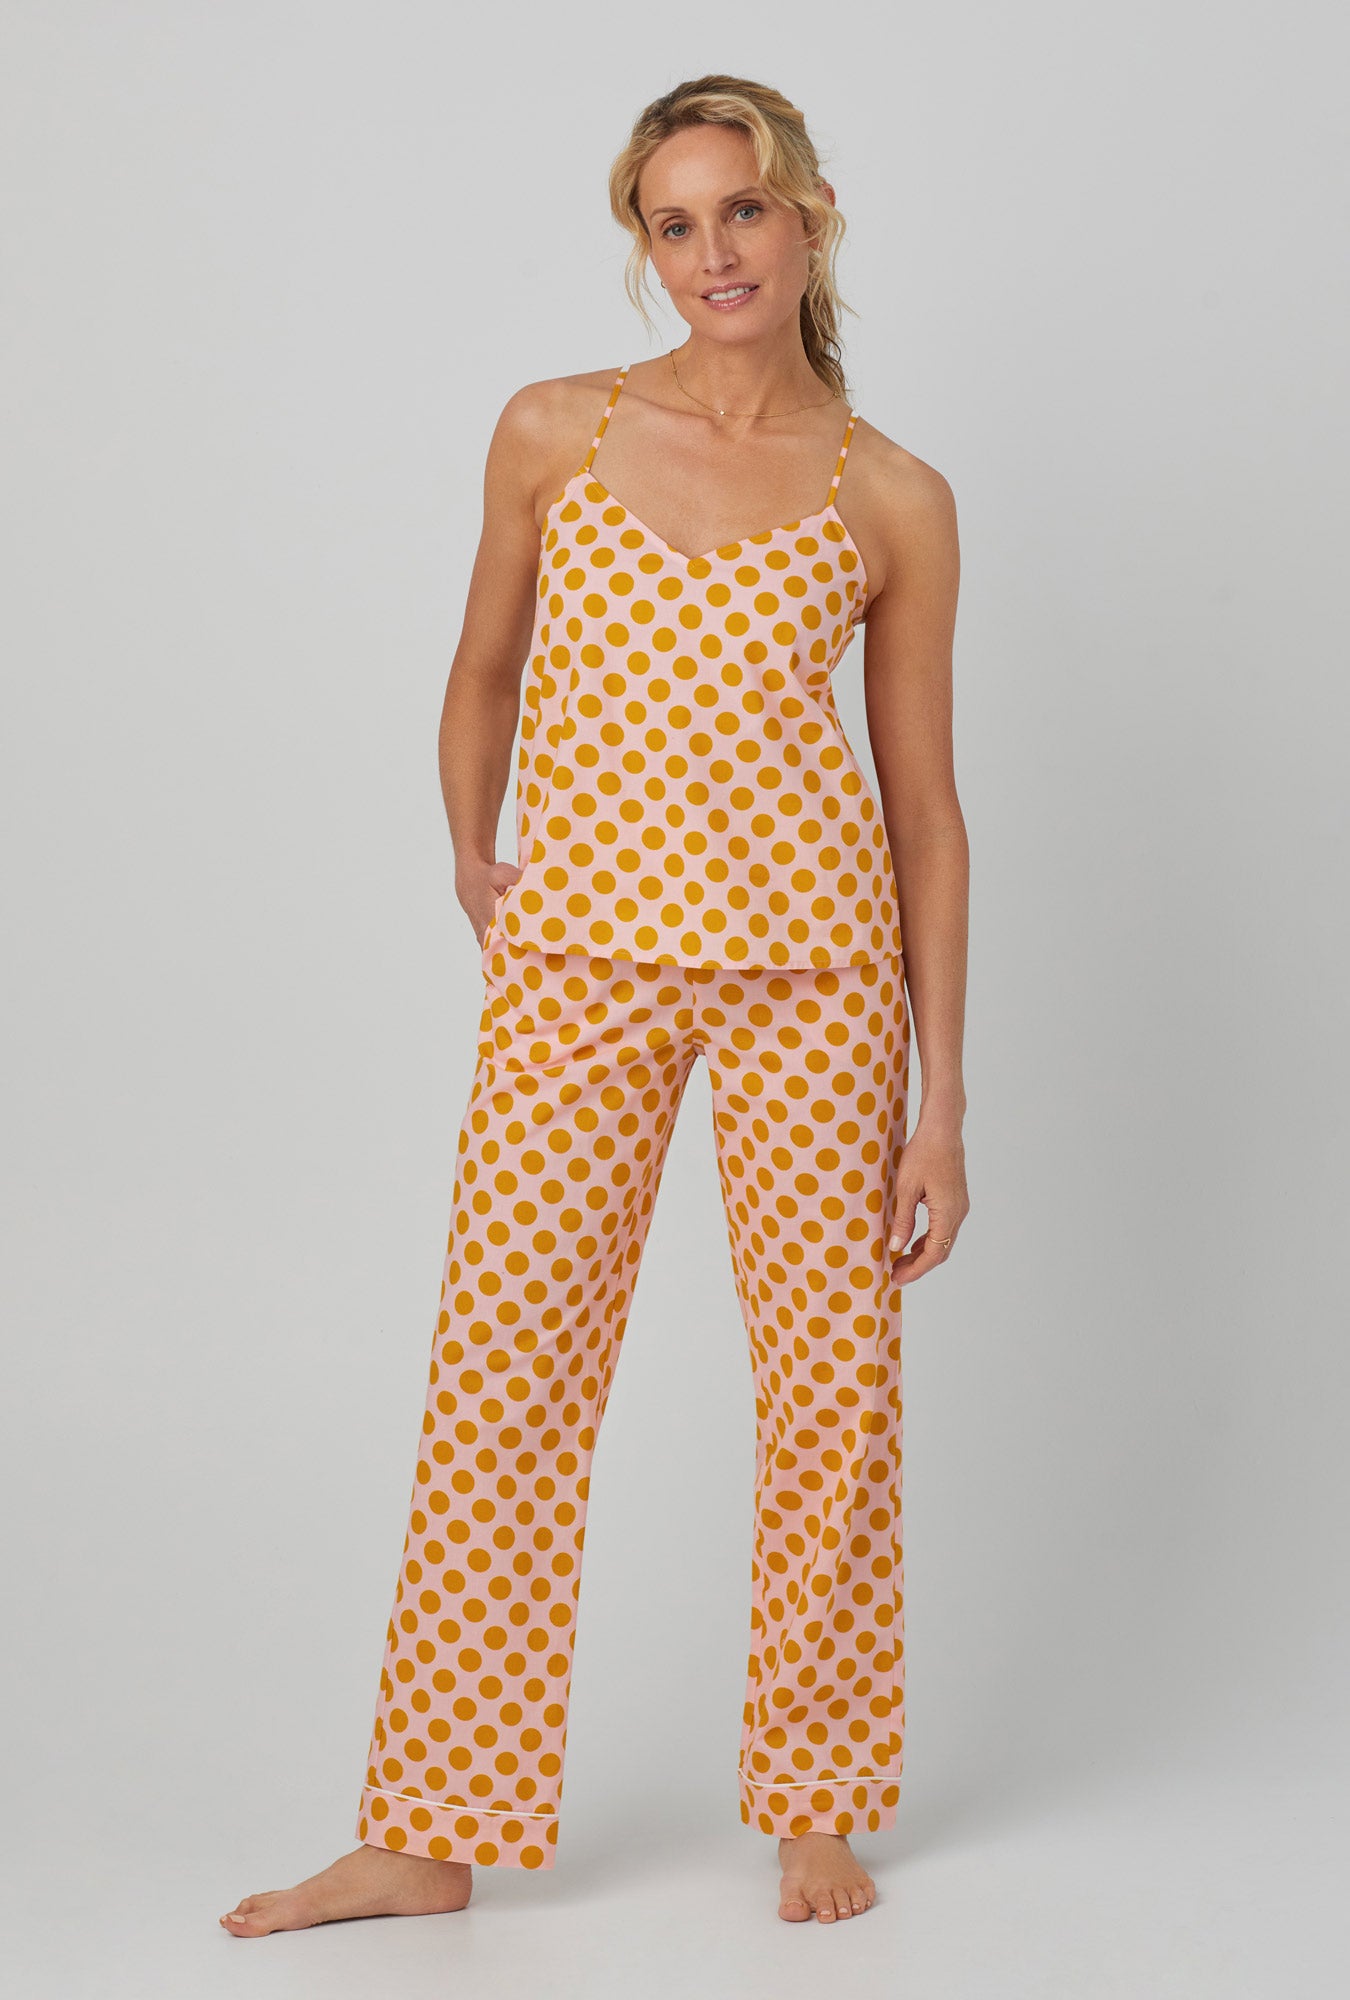 A lady wearing cami tank woven cotton poplin long pj set with call button